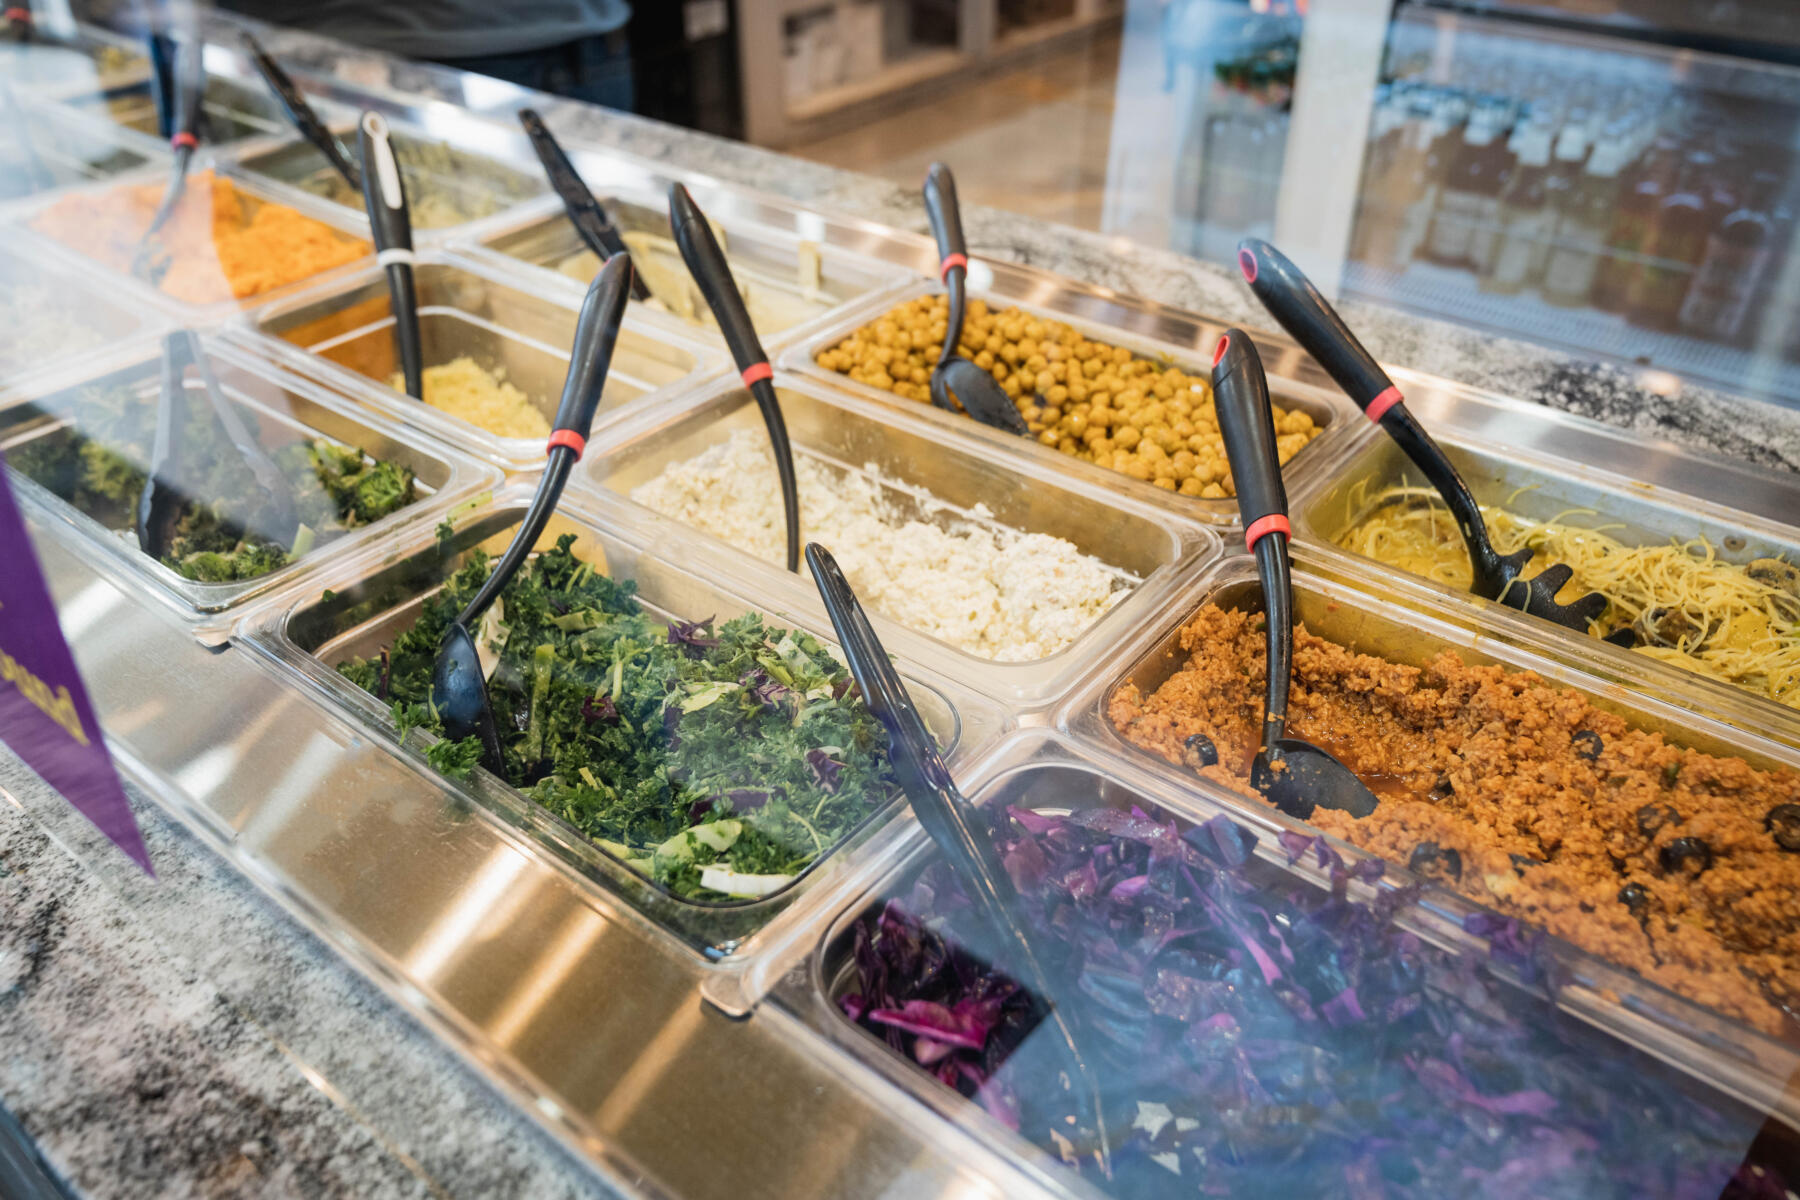 The hot bar at Soul Veg City in Greater Grand Crossing